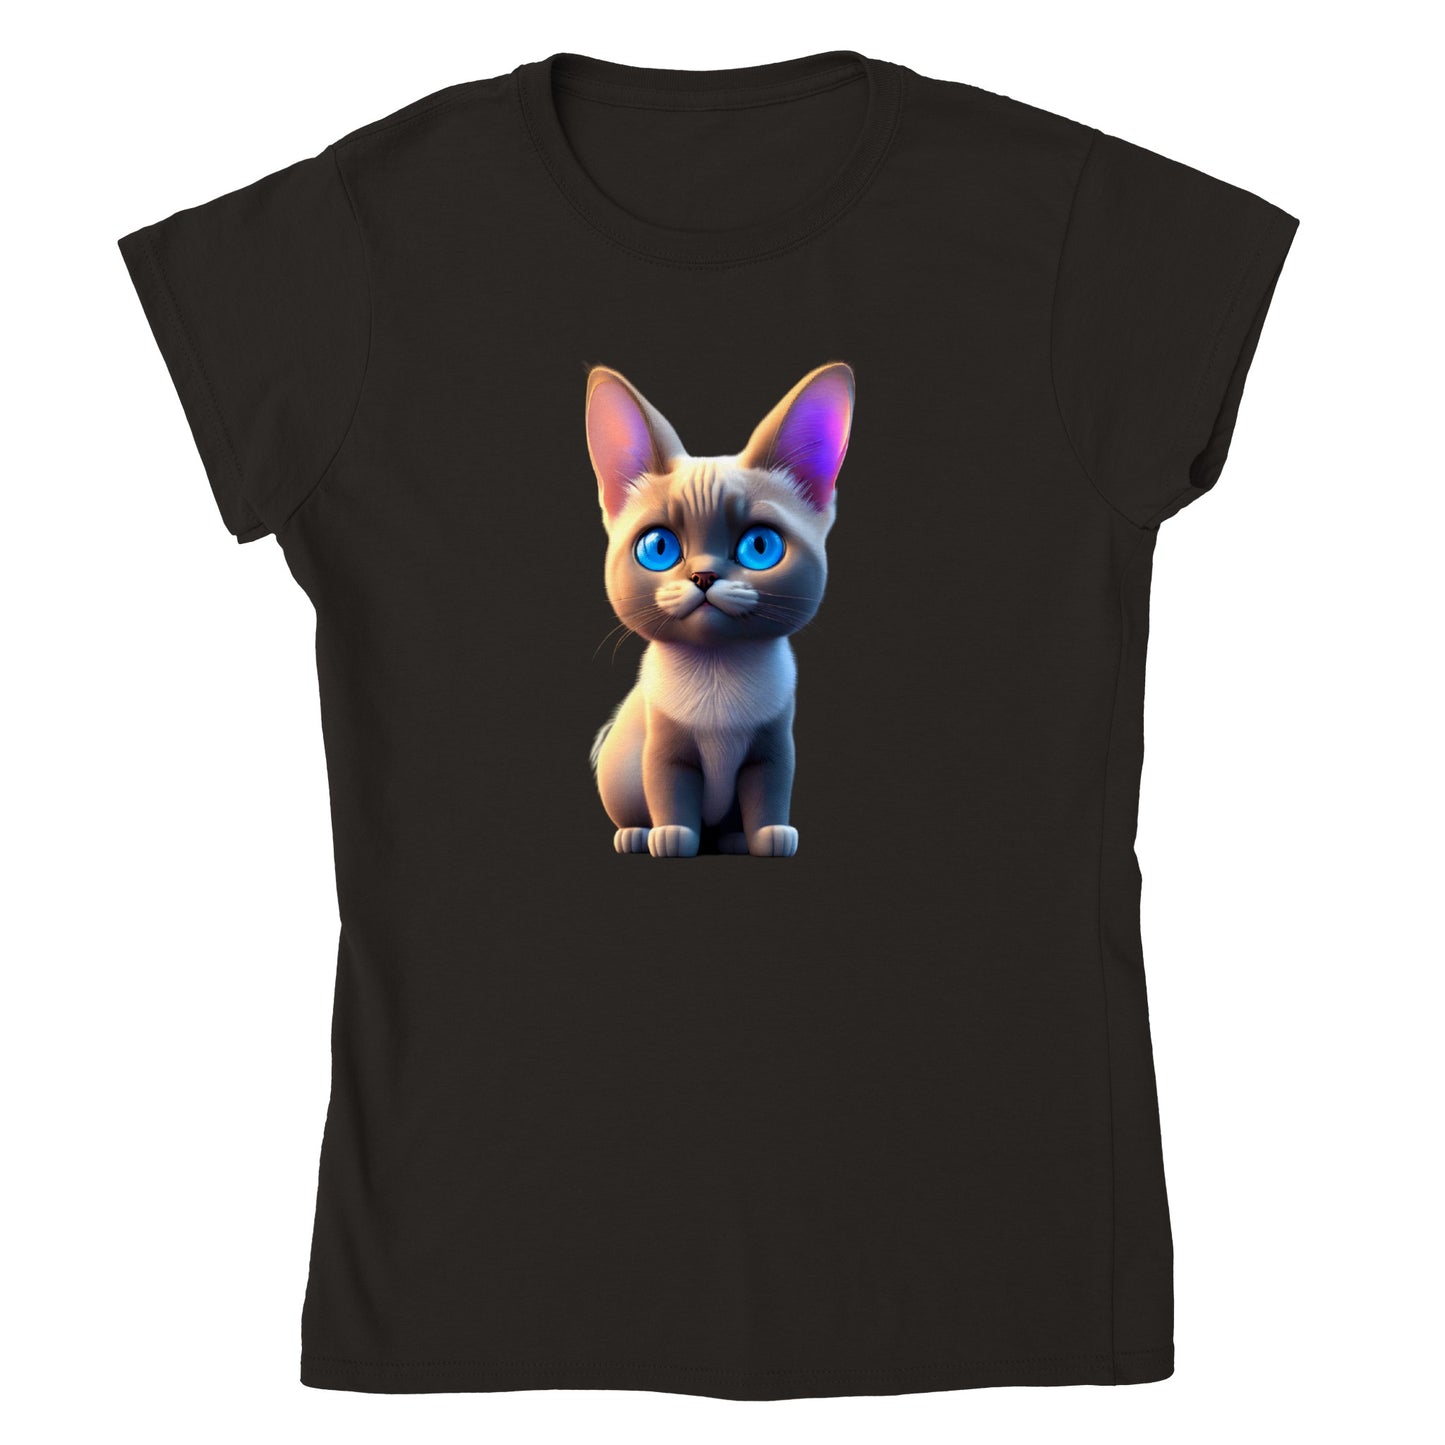 Adorable, Cool, Cute Cats and Kittens Toy - Classic Women’s Crewneck T-Shirt 30